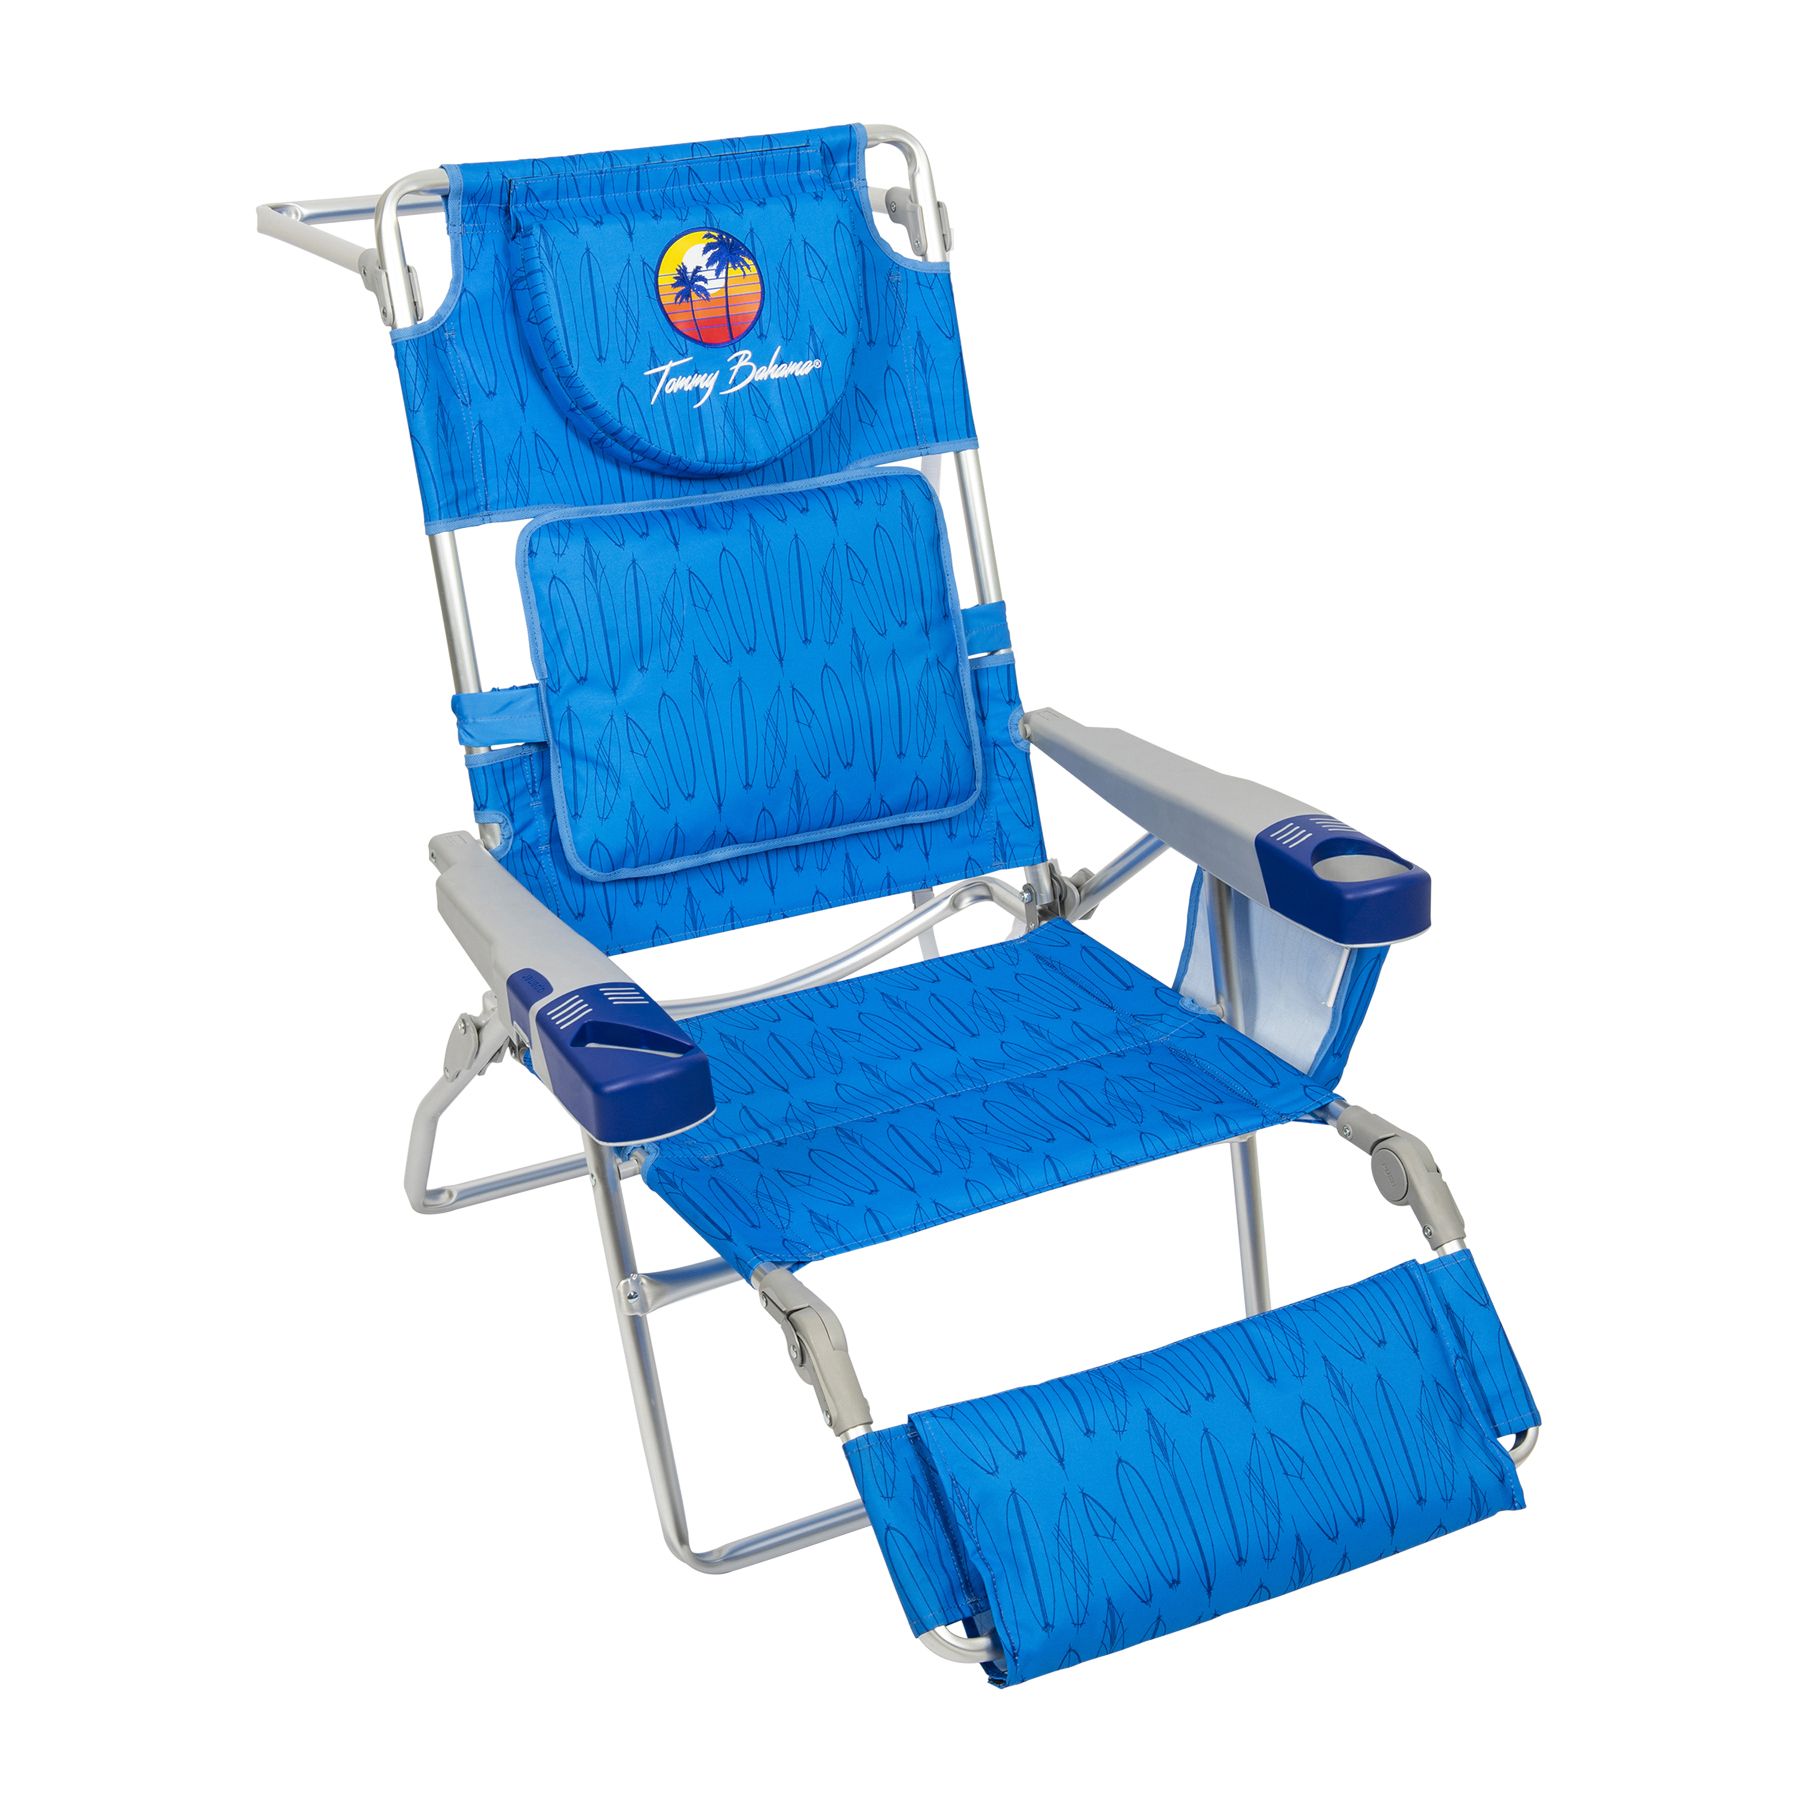 Tommy Bahama Read-Through Lounger - Blue | BJ's Wholesale Club